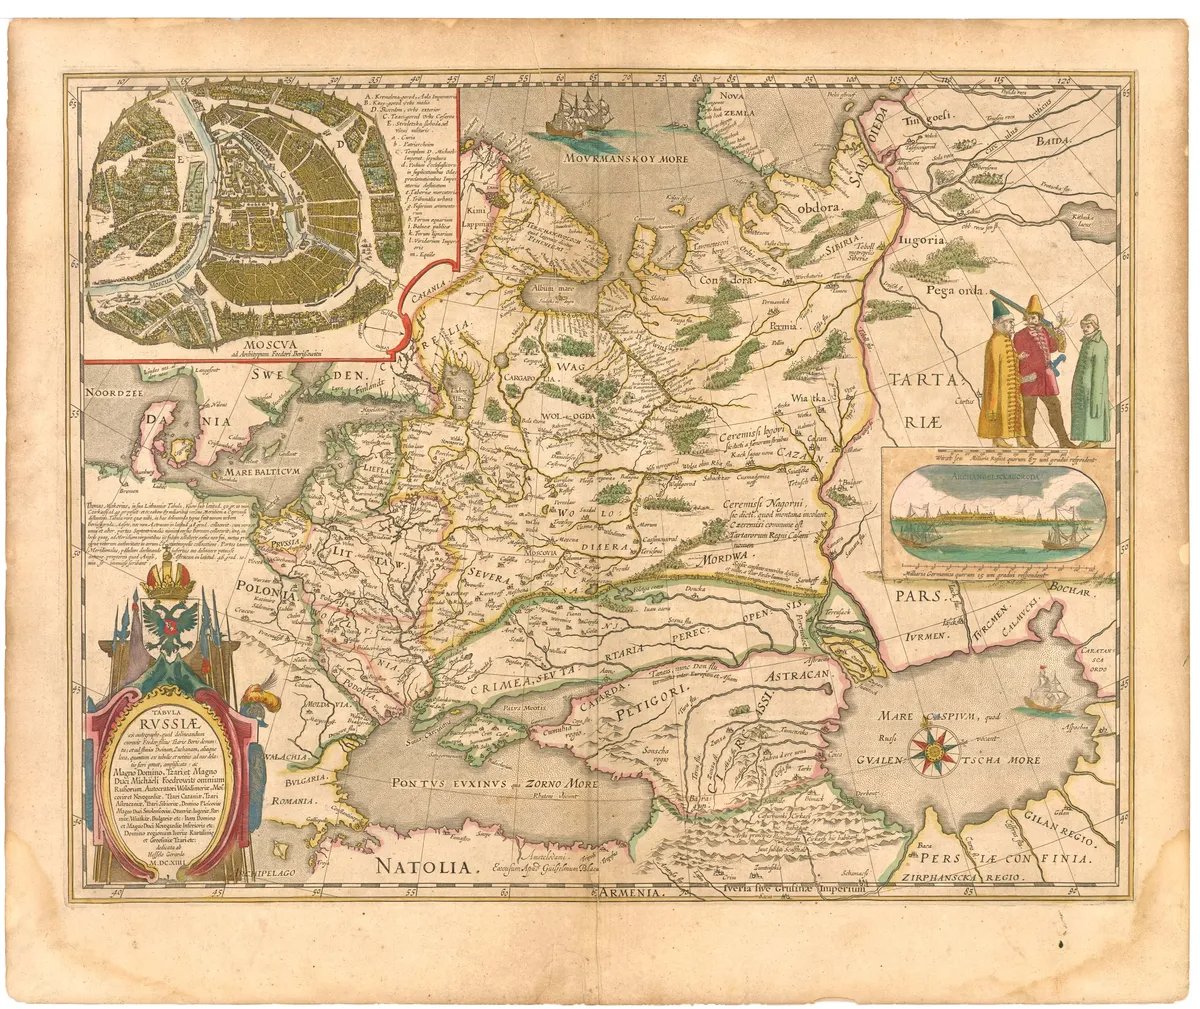 A map dating back to 1645 featured in the Atlas Maior. Source: Wikimedia